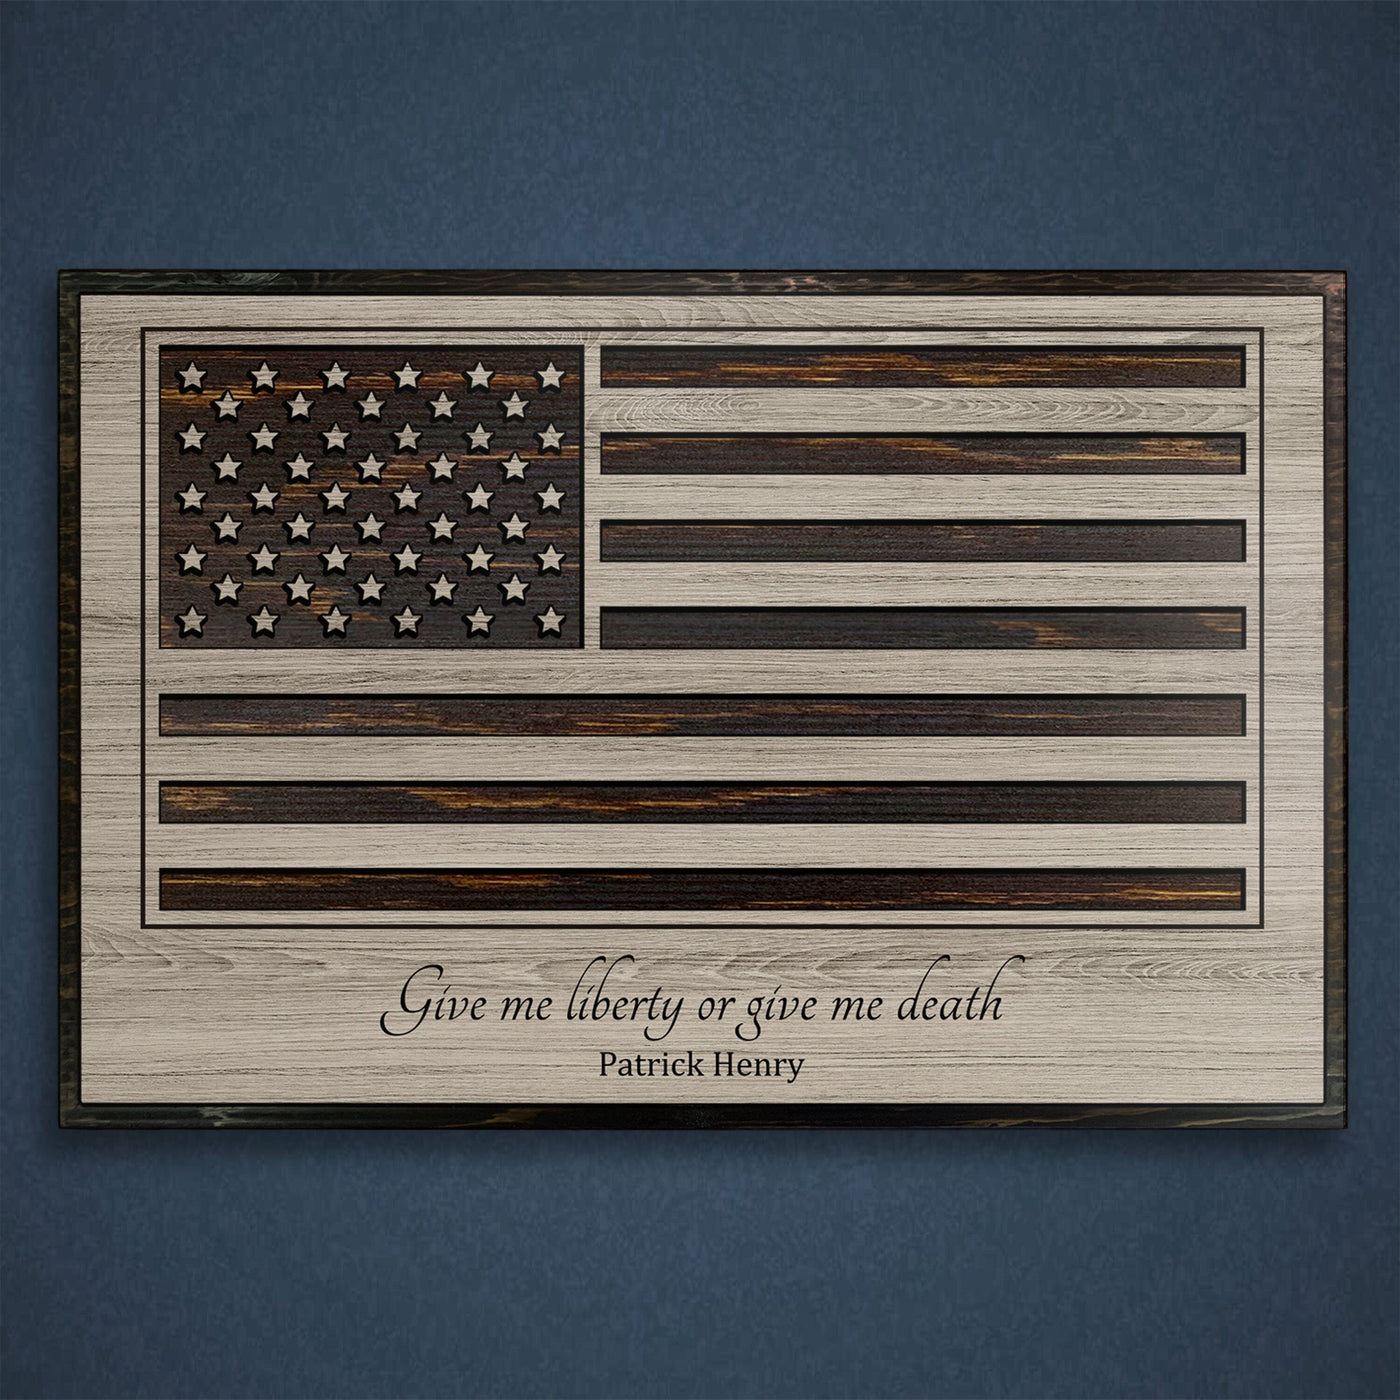 custom carved american flag wood wall art with Patrick Henry quote give me liberty or give me death